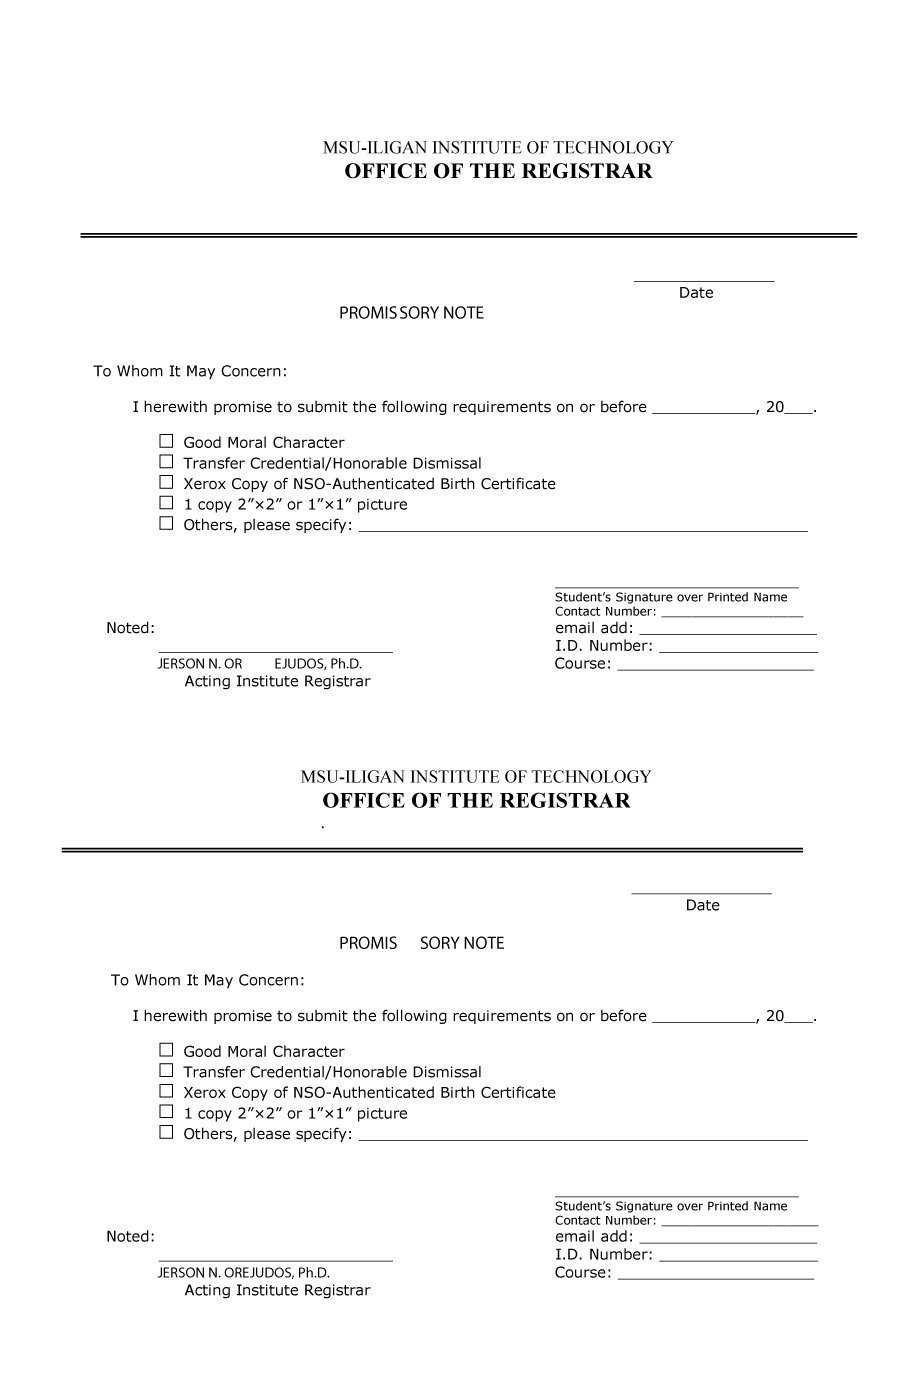 Personal Note Template – Colona.rsd7 Intended For Free Promissory Note Template For Personal Loan